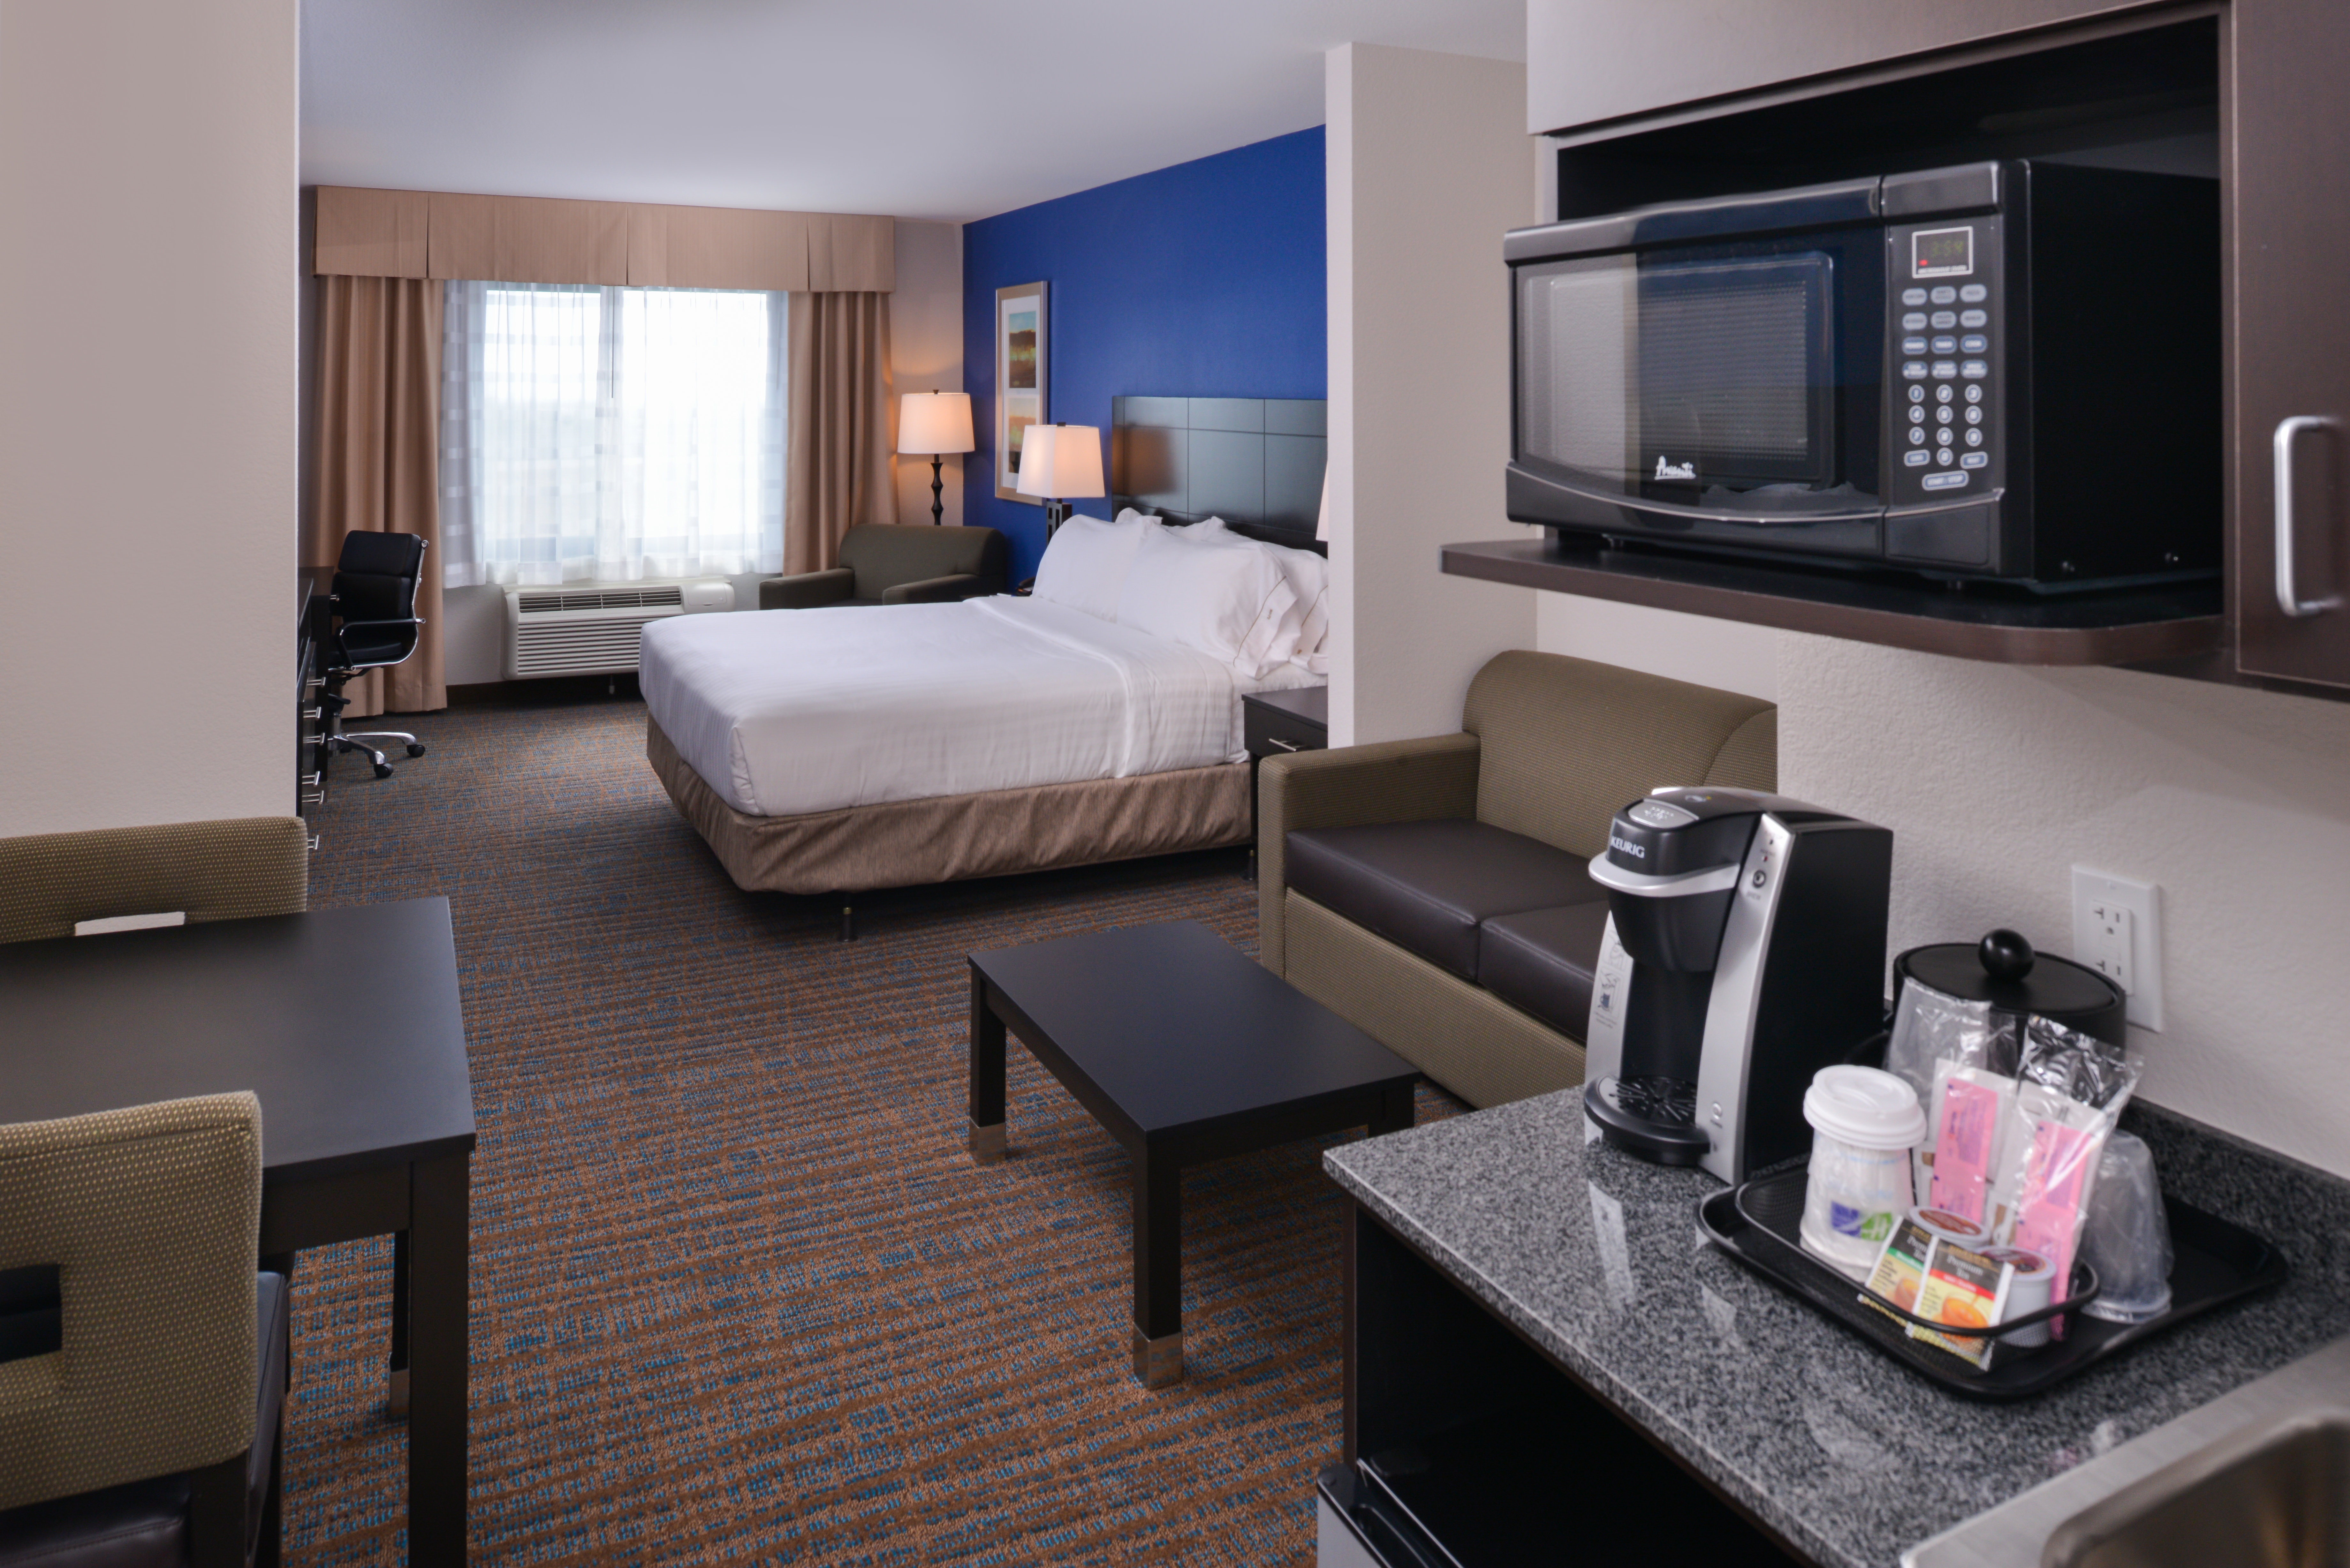 Modern conveniences and comfort await you at our Bakersfield hotel